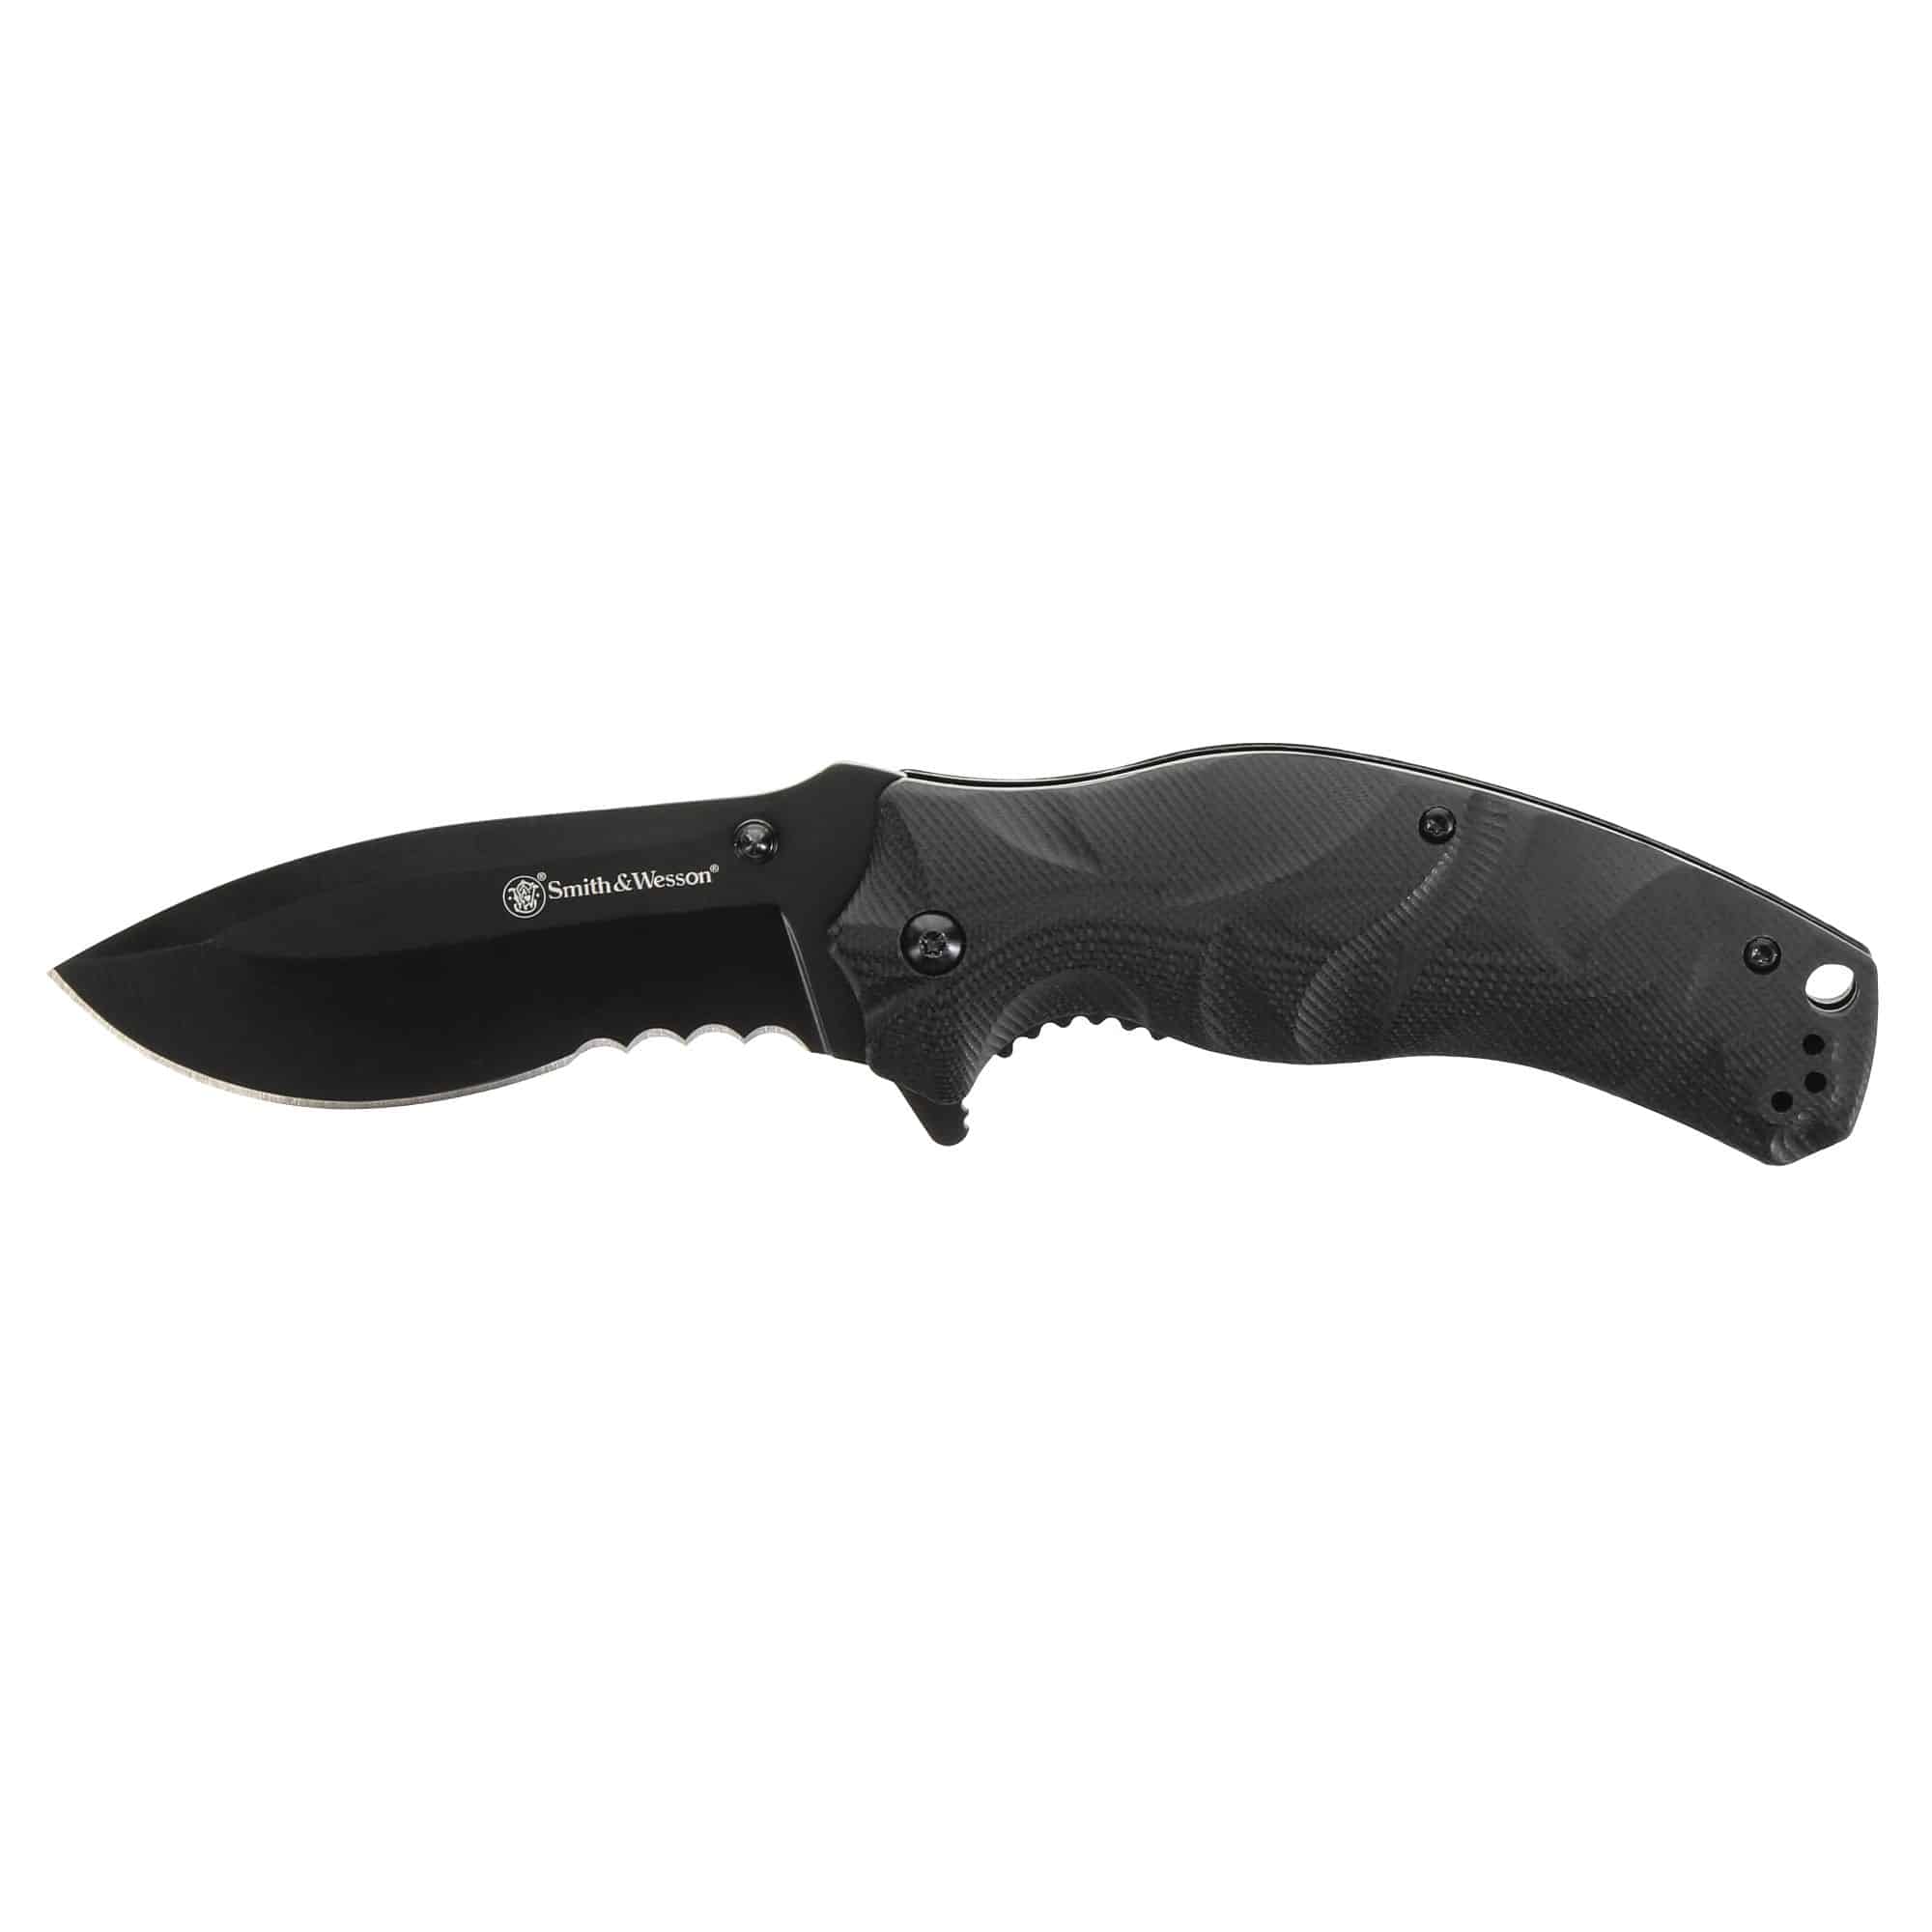 Smith & Wesson® 1136220 Black Ops Recurve | Smith & Wesson